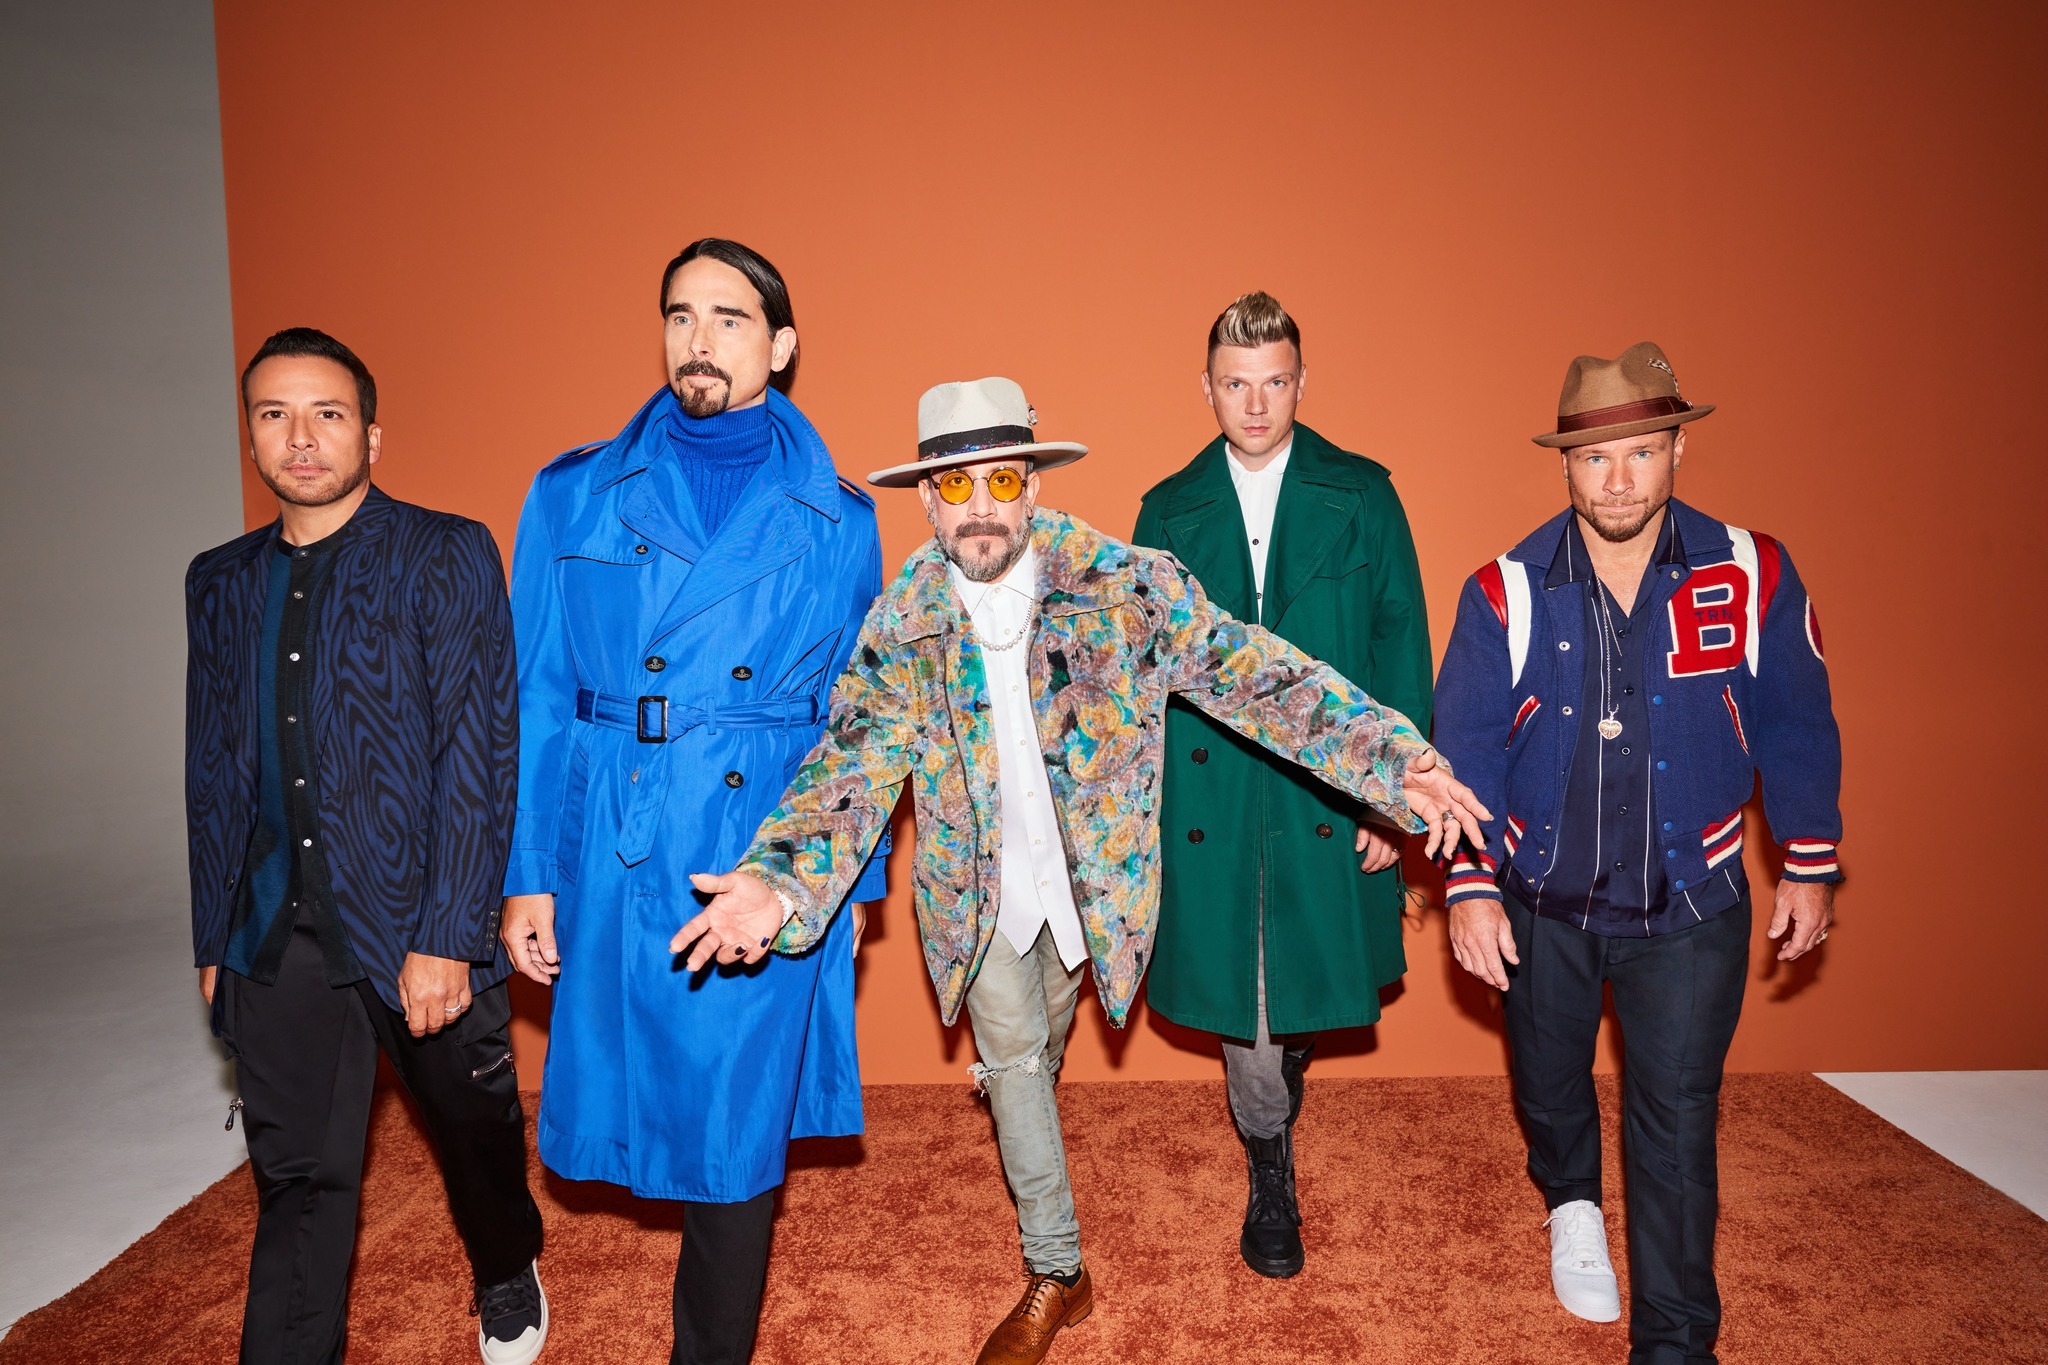 Backstreet Boys to perform in Hong Kong this March